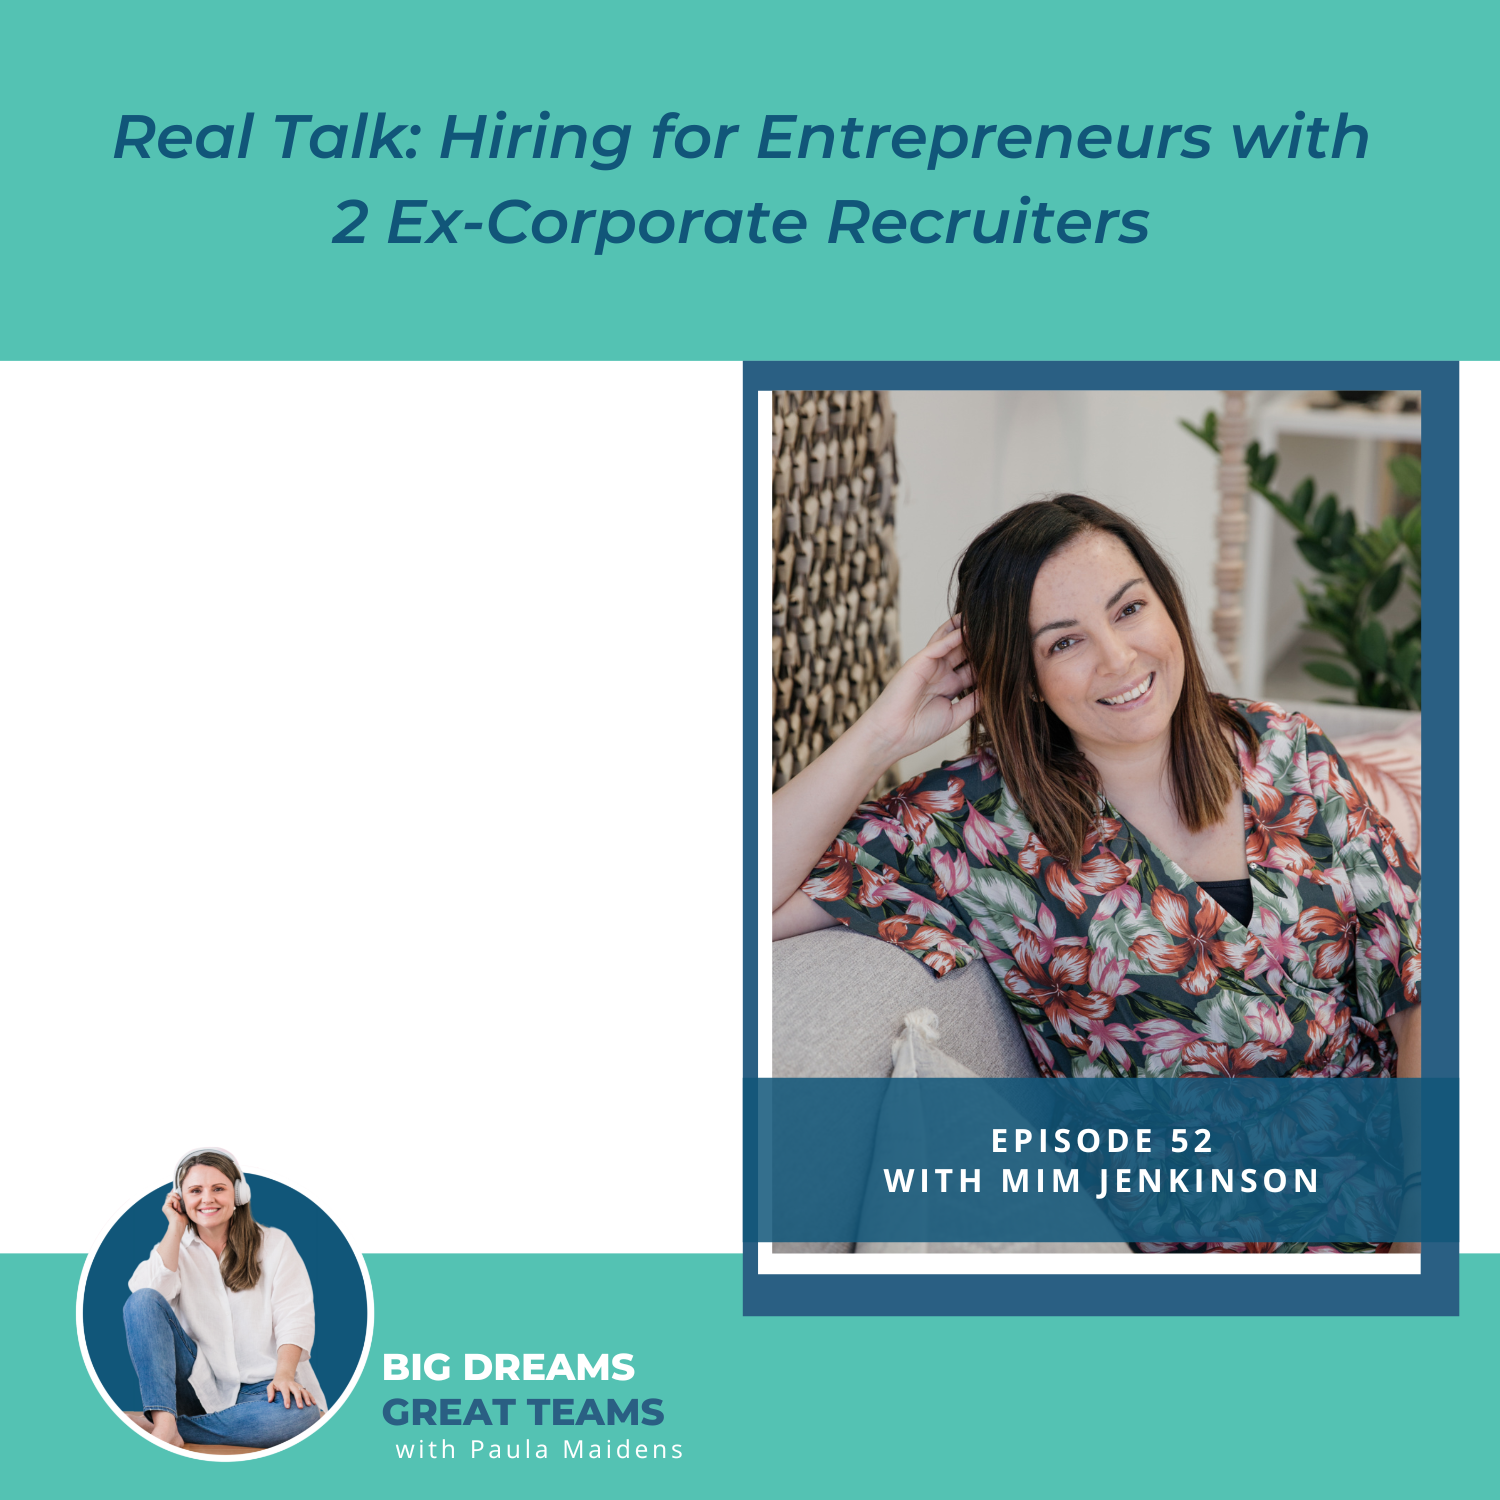 Real Talk: Hiring for Entrepreneurs with 2 Ex-Corporate Recruiters with Mim Jenkinson